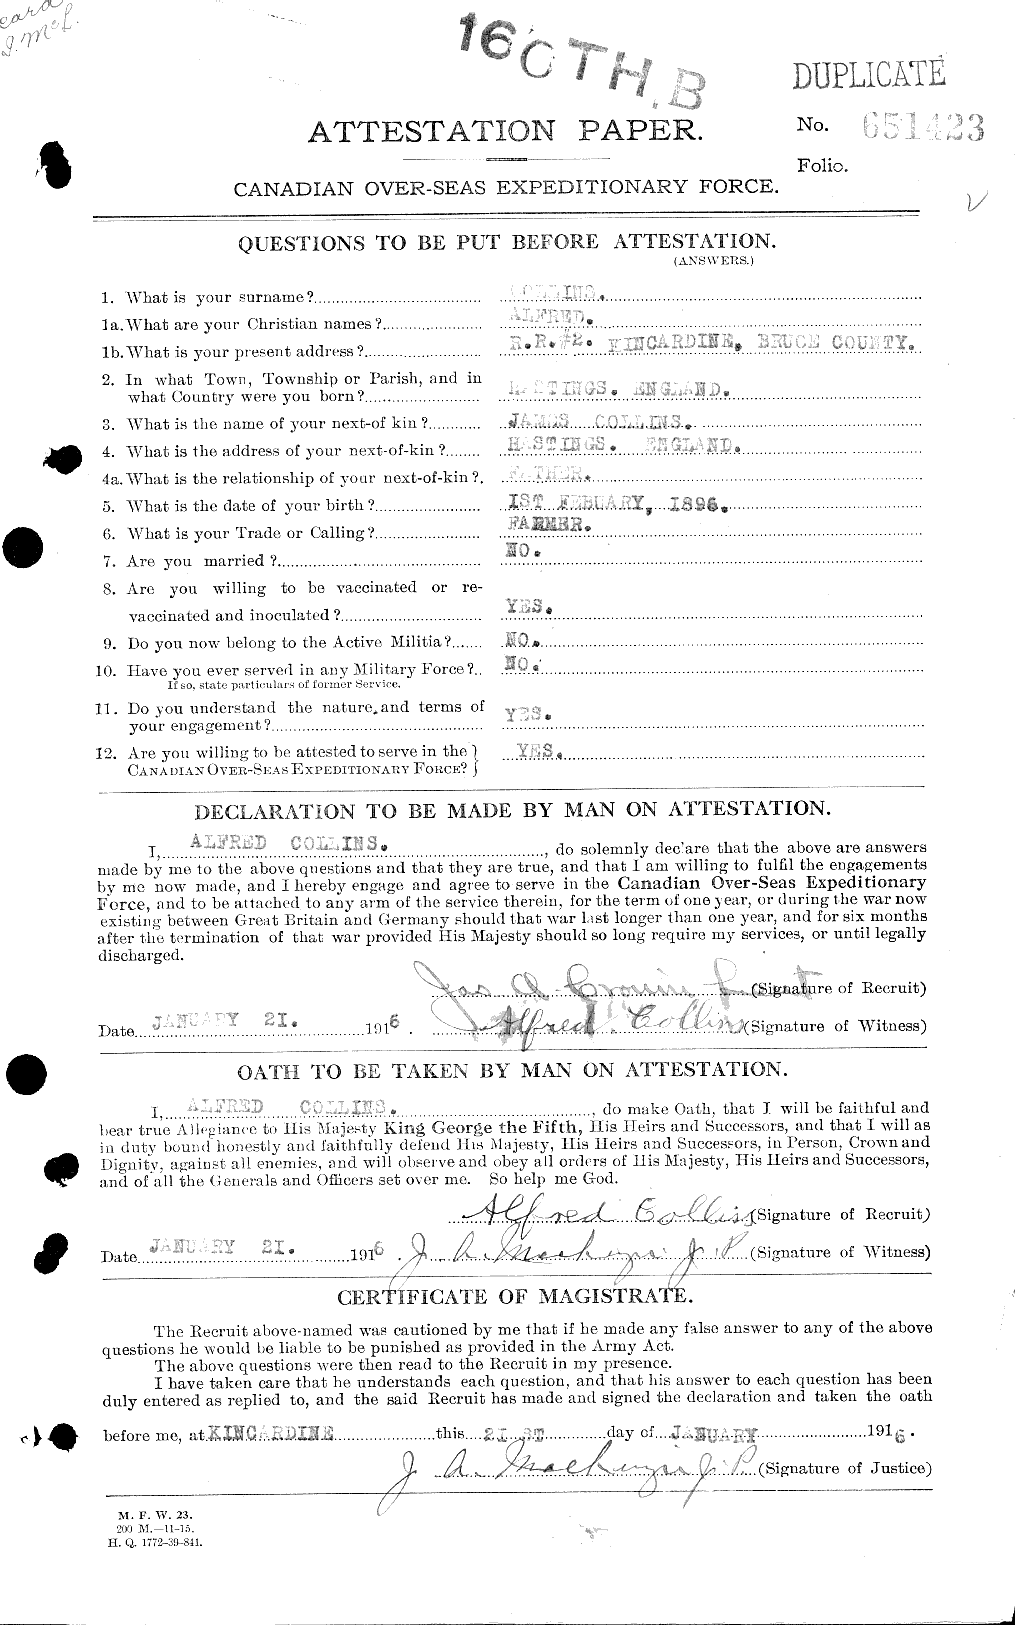 Personnel Records of the First World War - CEF 028950a